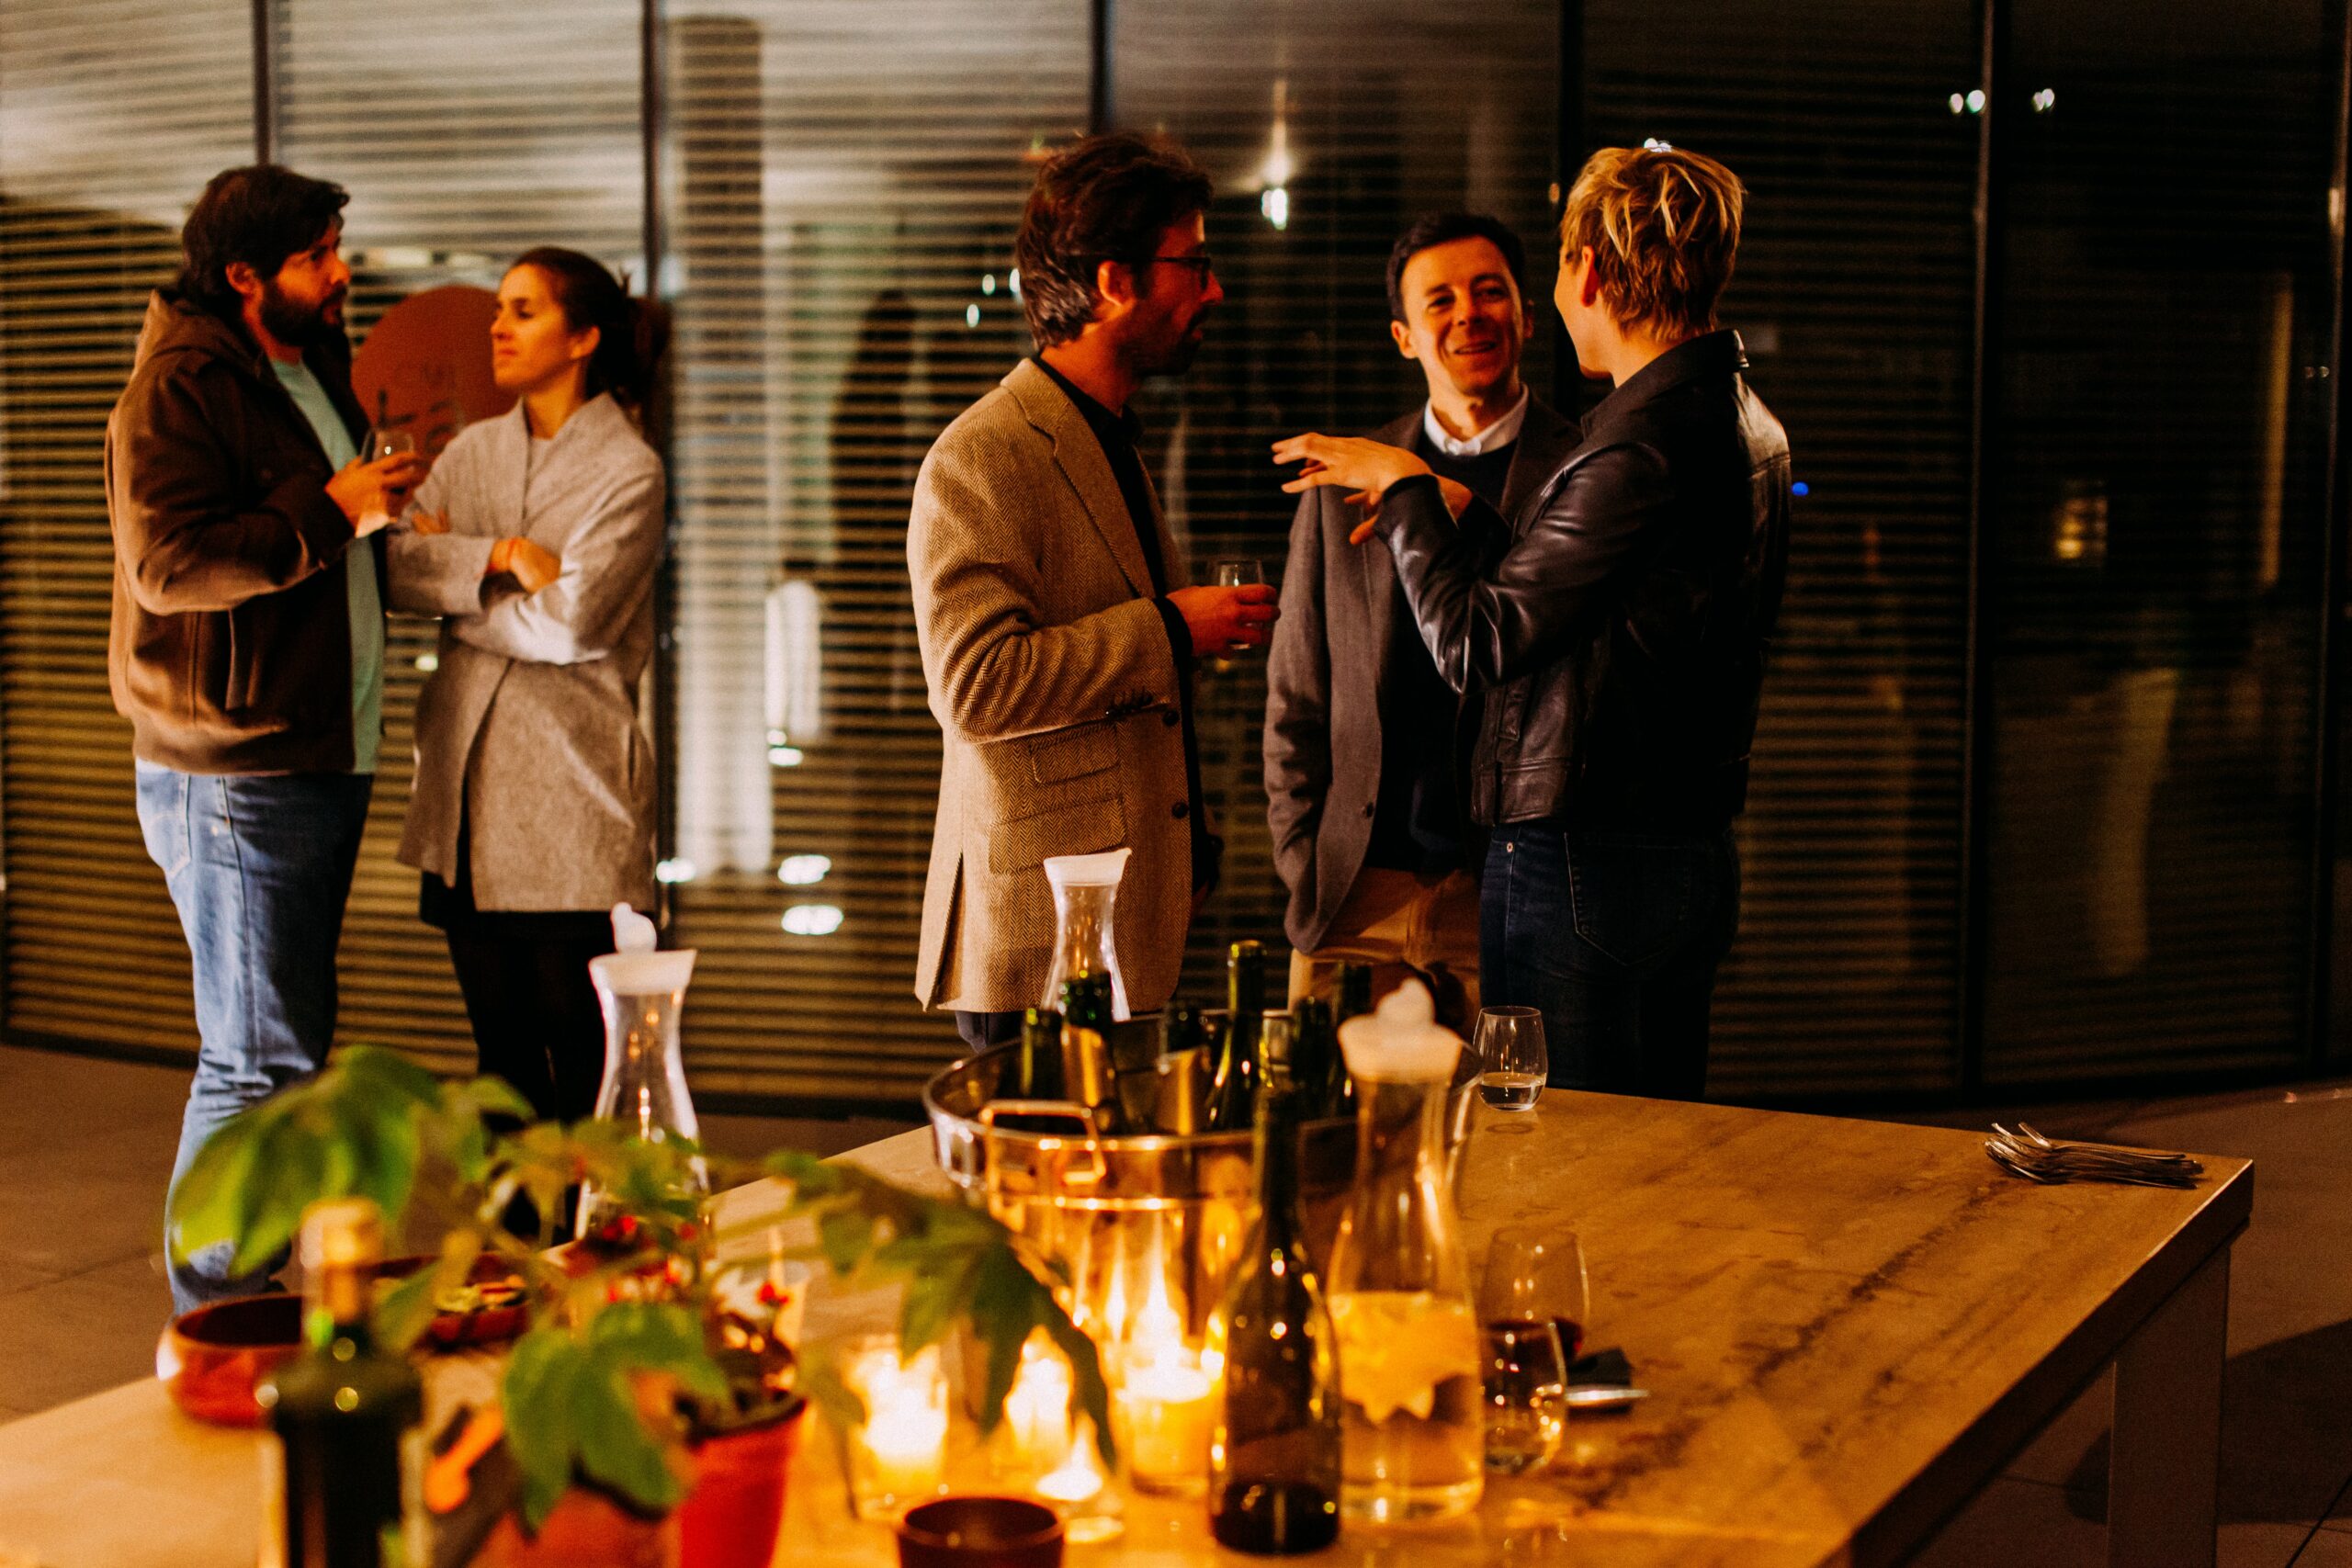 3 Reasons Why You Should Attend Your Next Staff Social